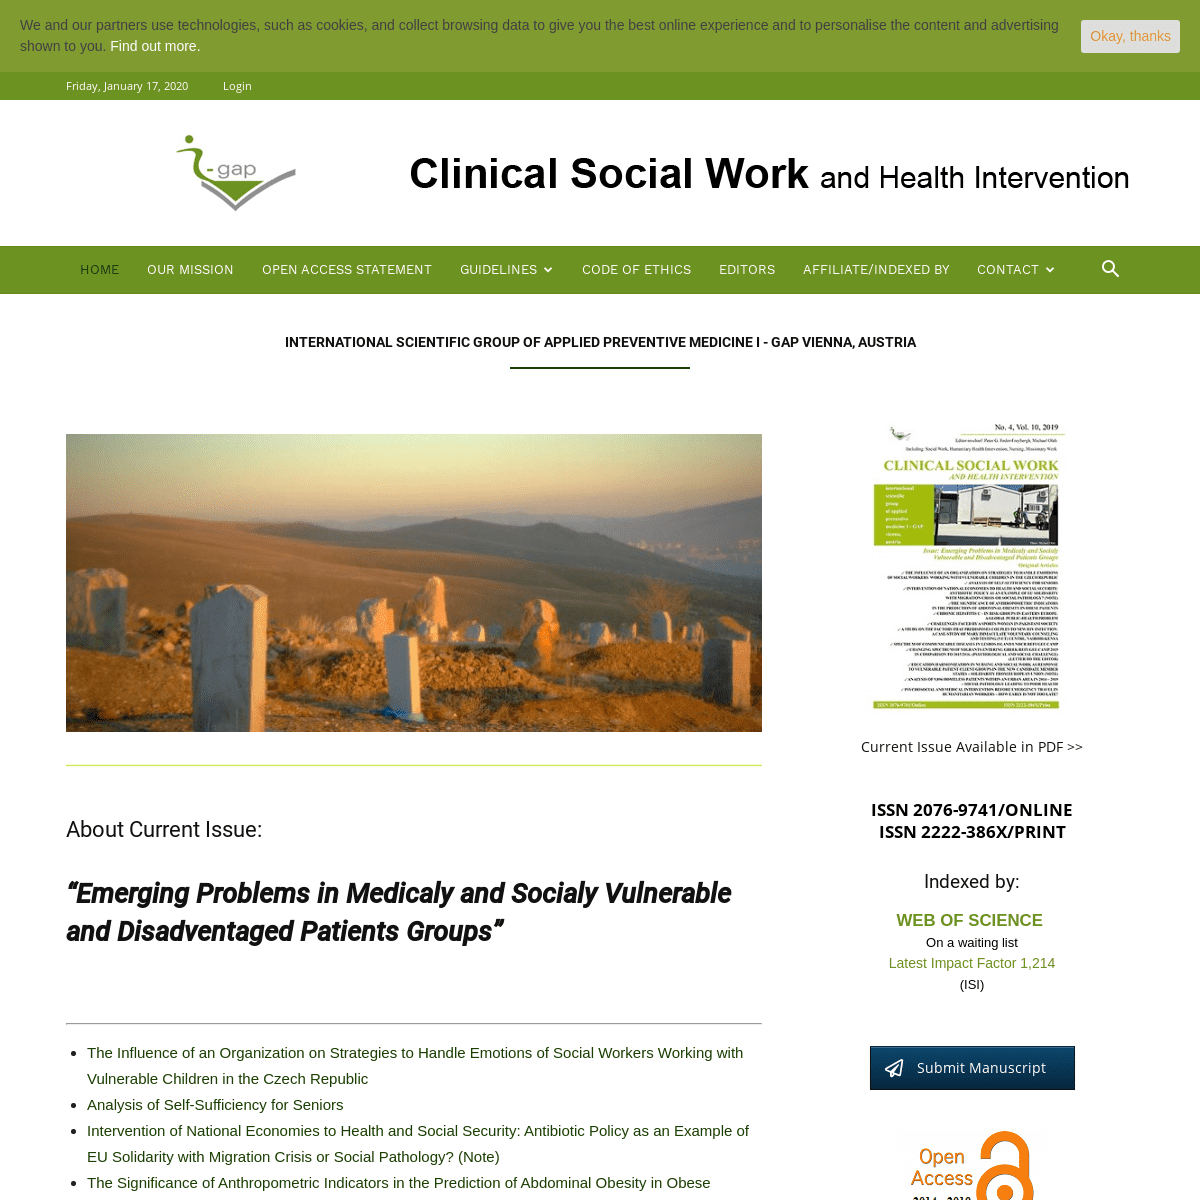 A complete backup of clinicalsocialwork.eu